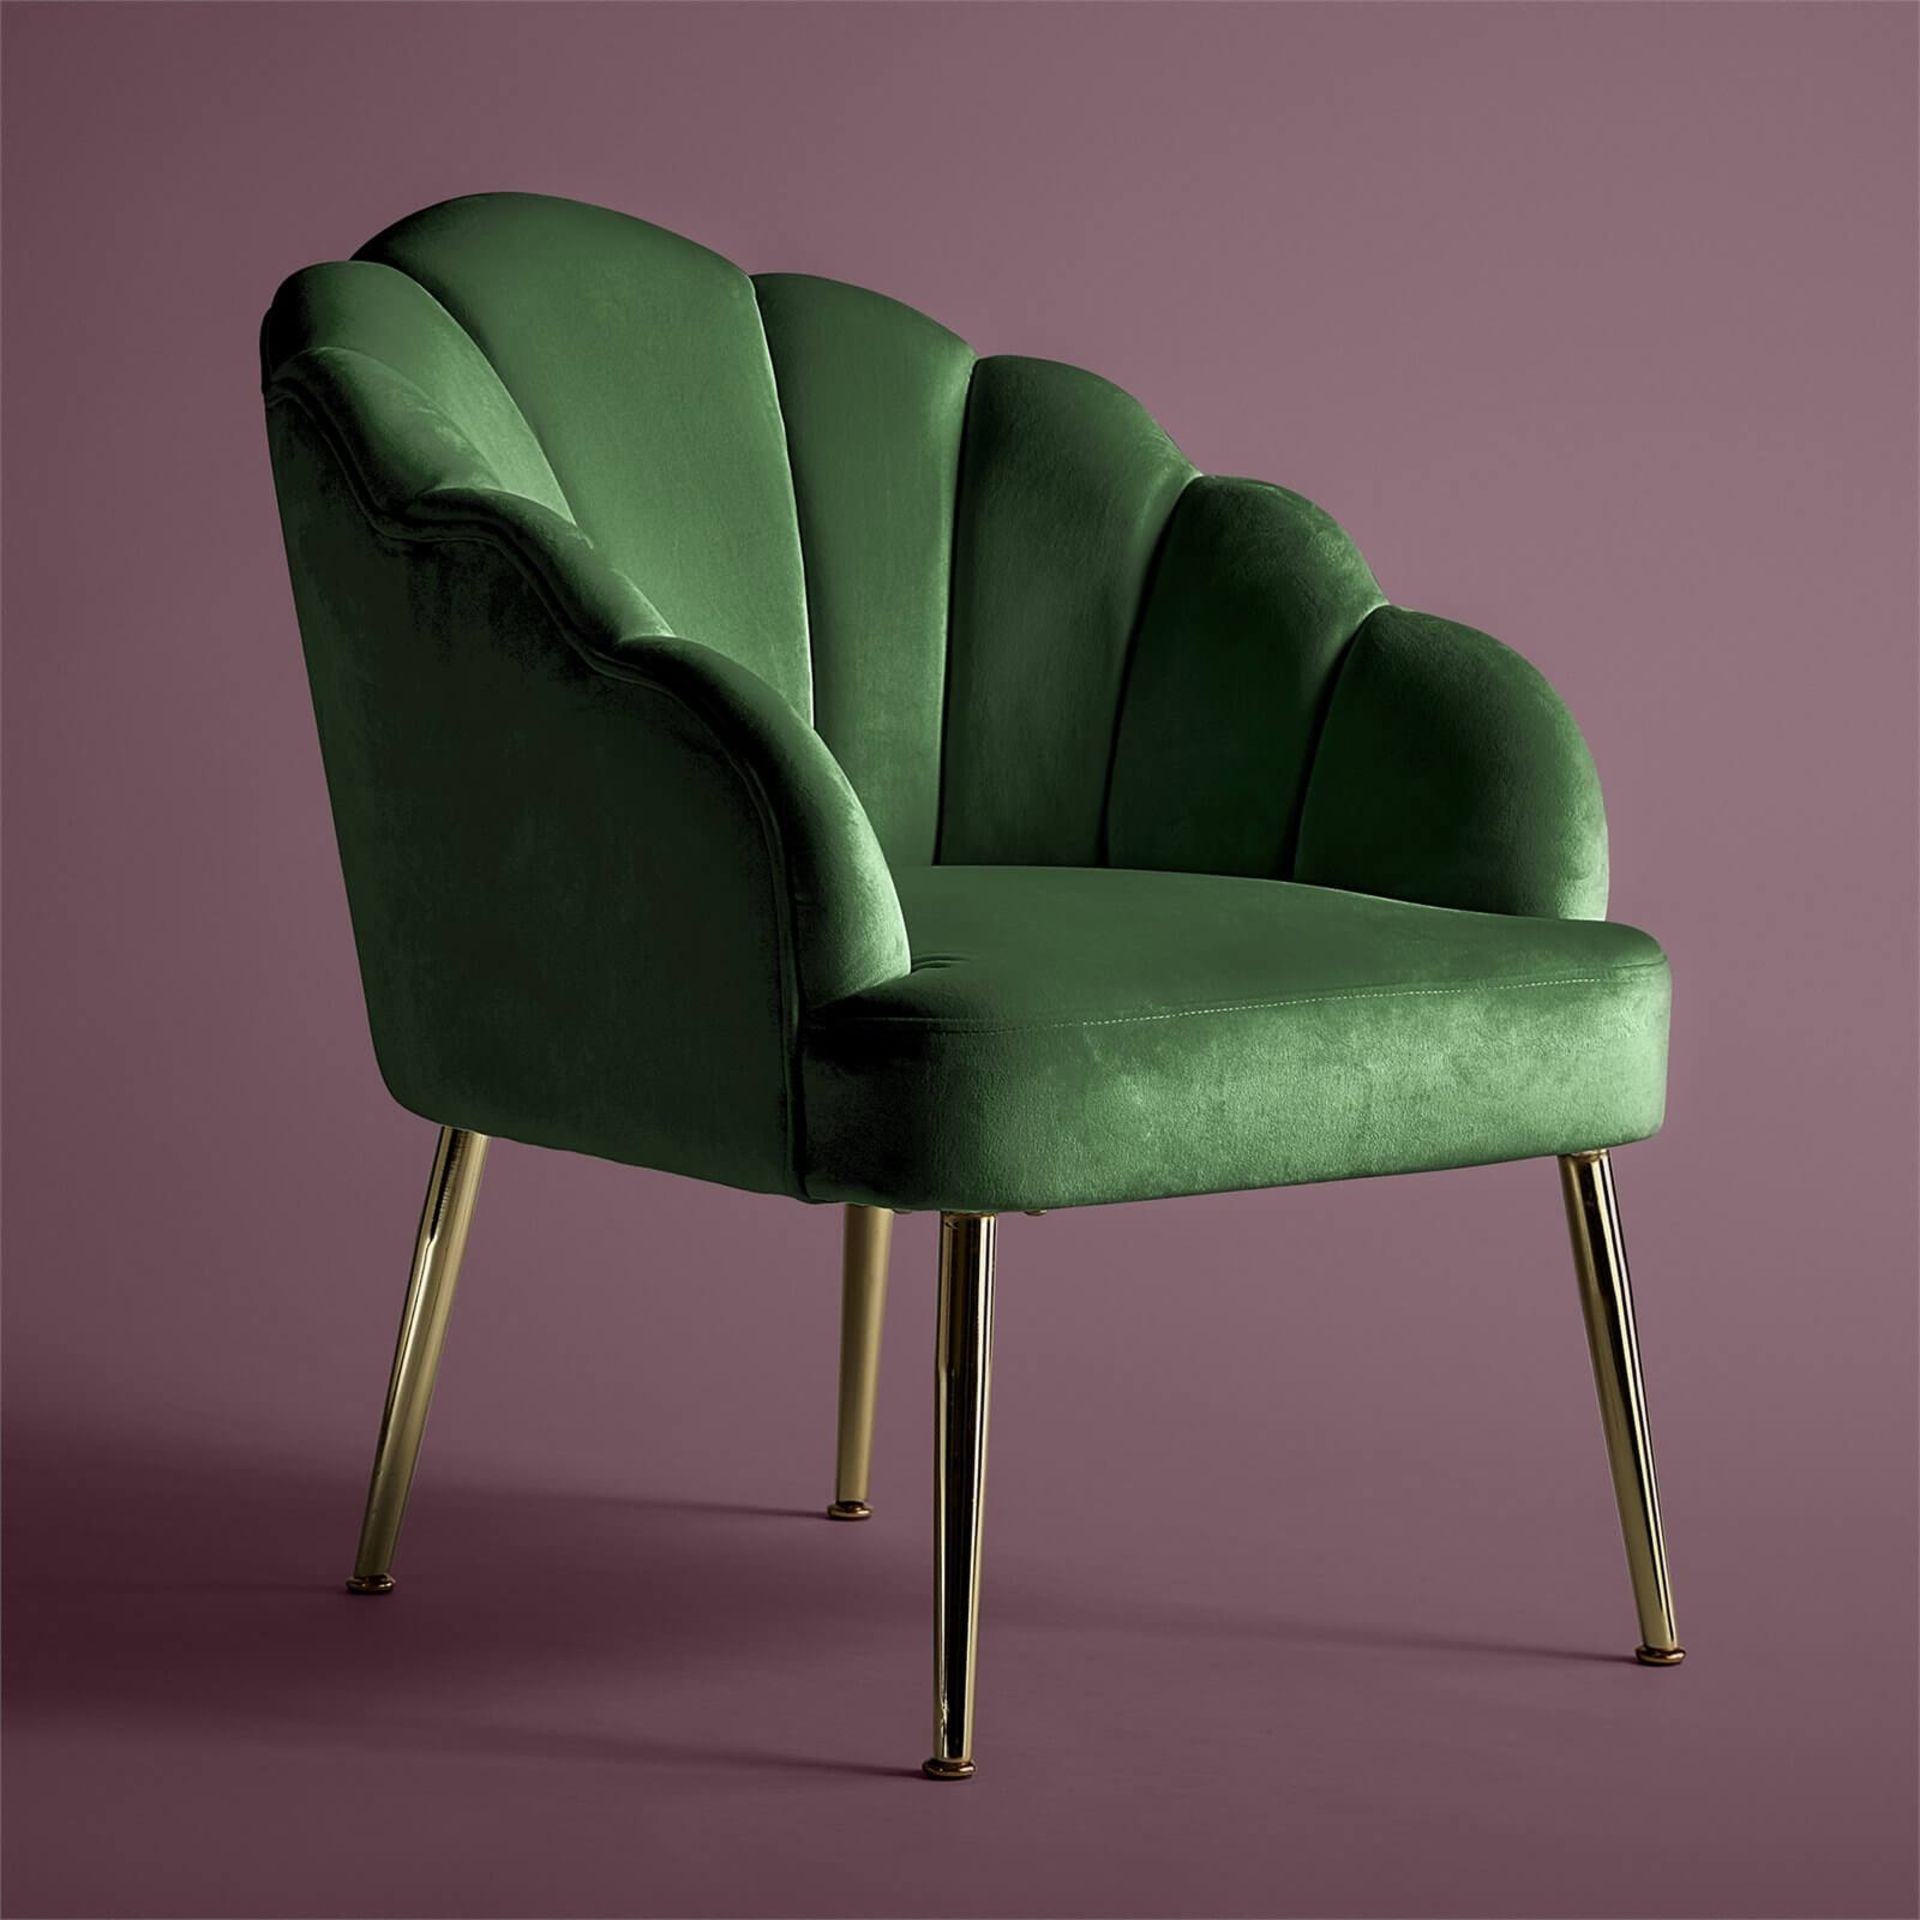 (R6J) 1 X Occasional Chair Emerald. Velvet Cover With Rubberwood Legs (H72xW60xD70cm)